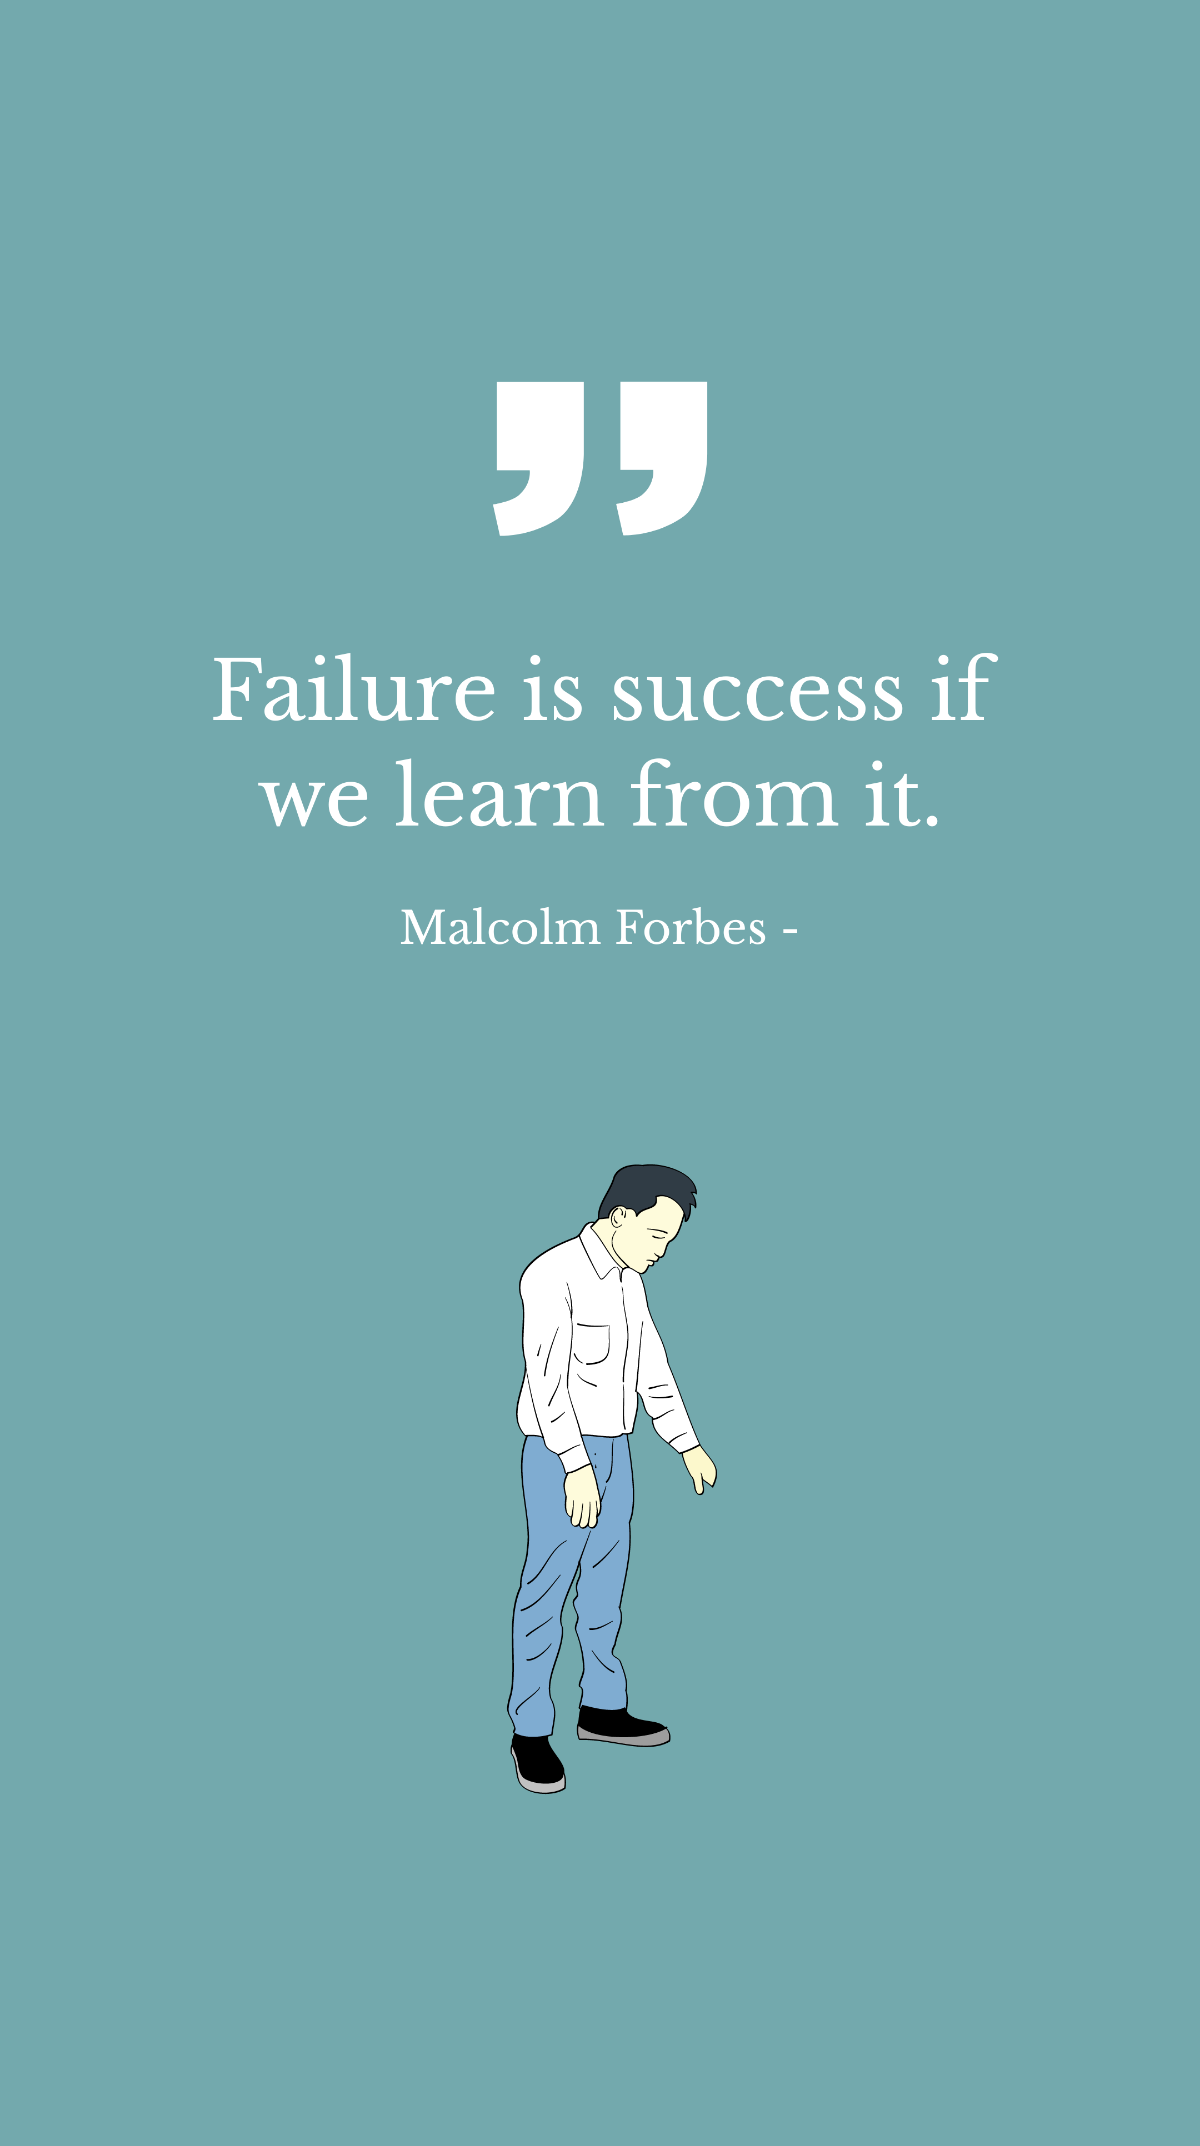 Malcolm Forbes - Failure is success if we learn from it. Template